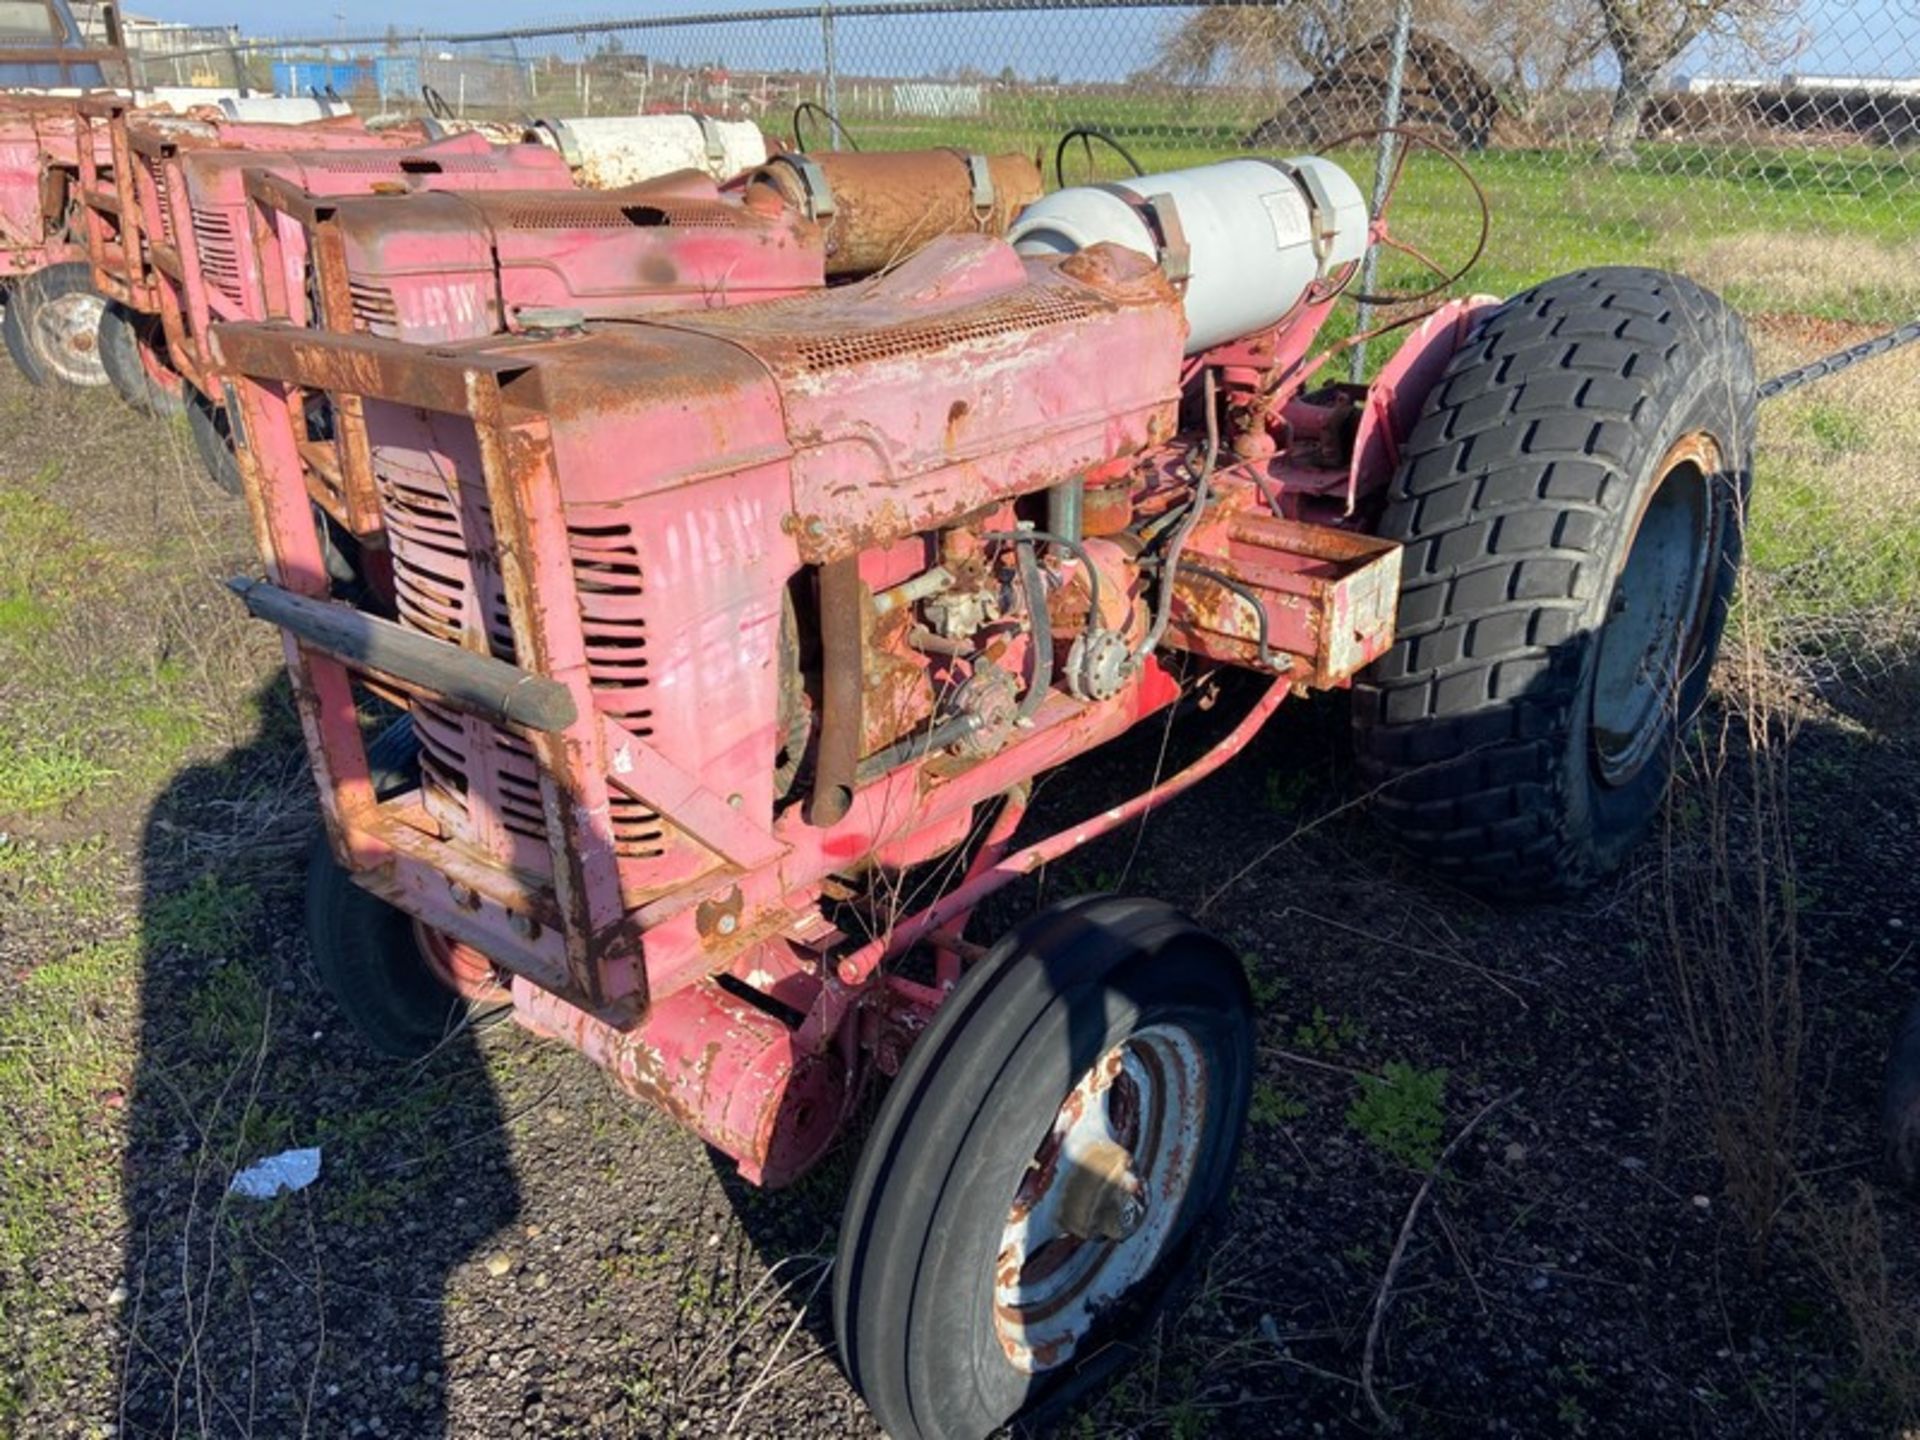 JRW Tractor (Unit 458) (LOCATED IN ATWATER, CA)